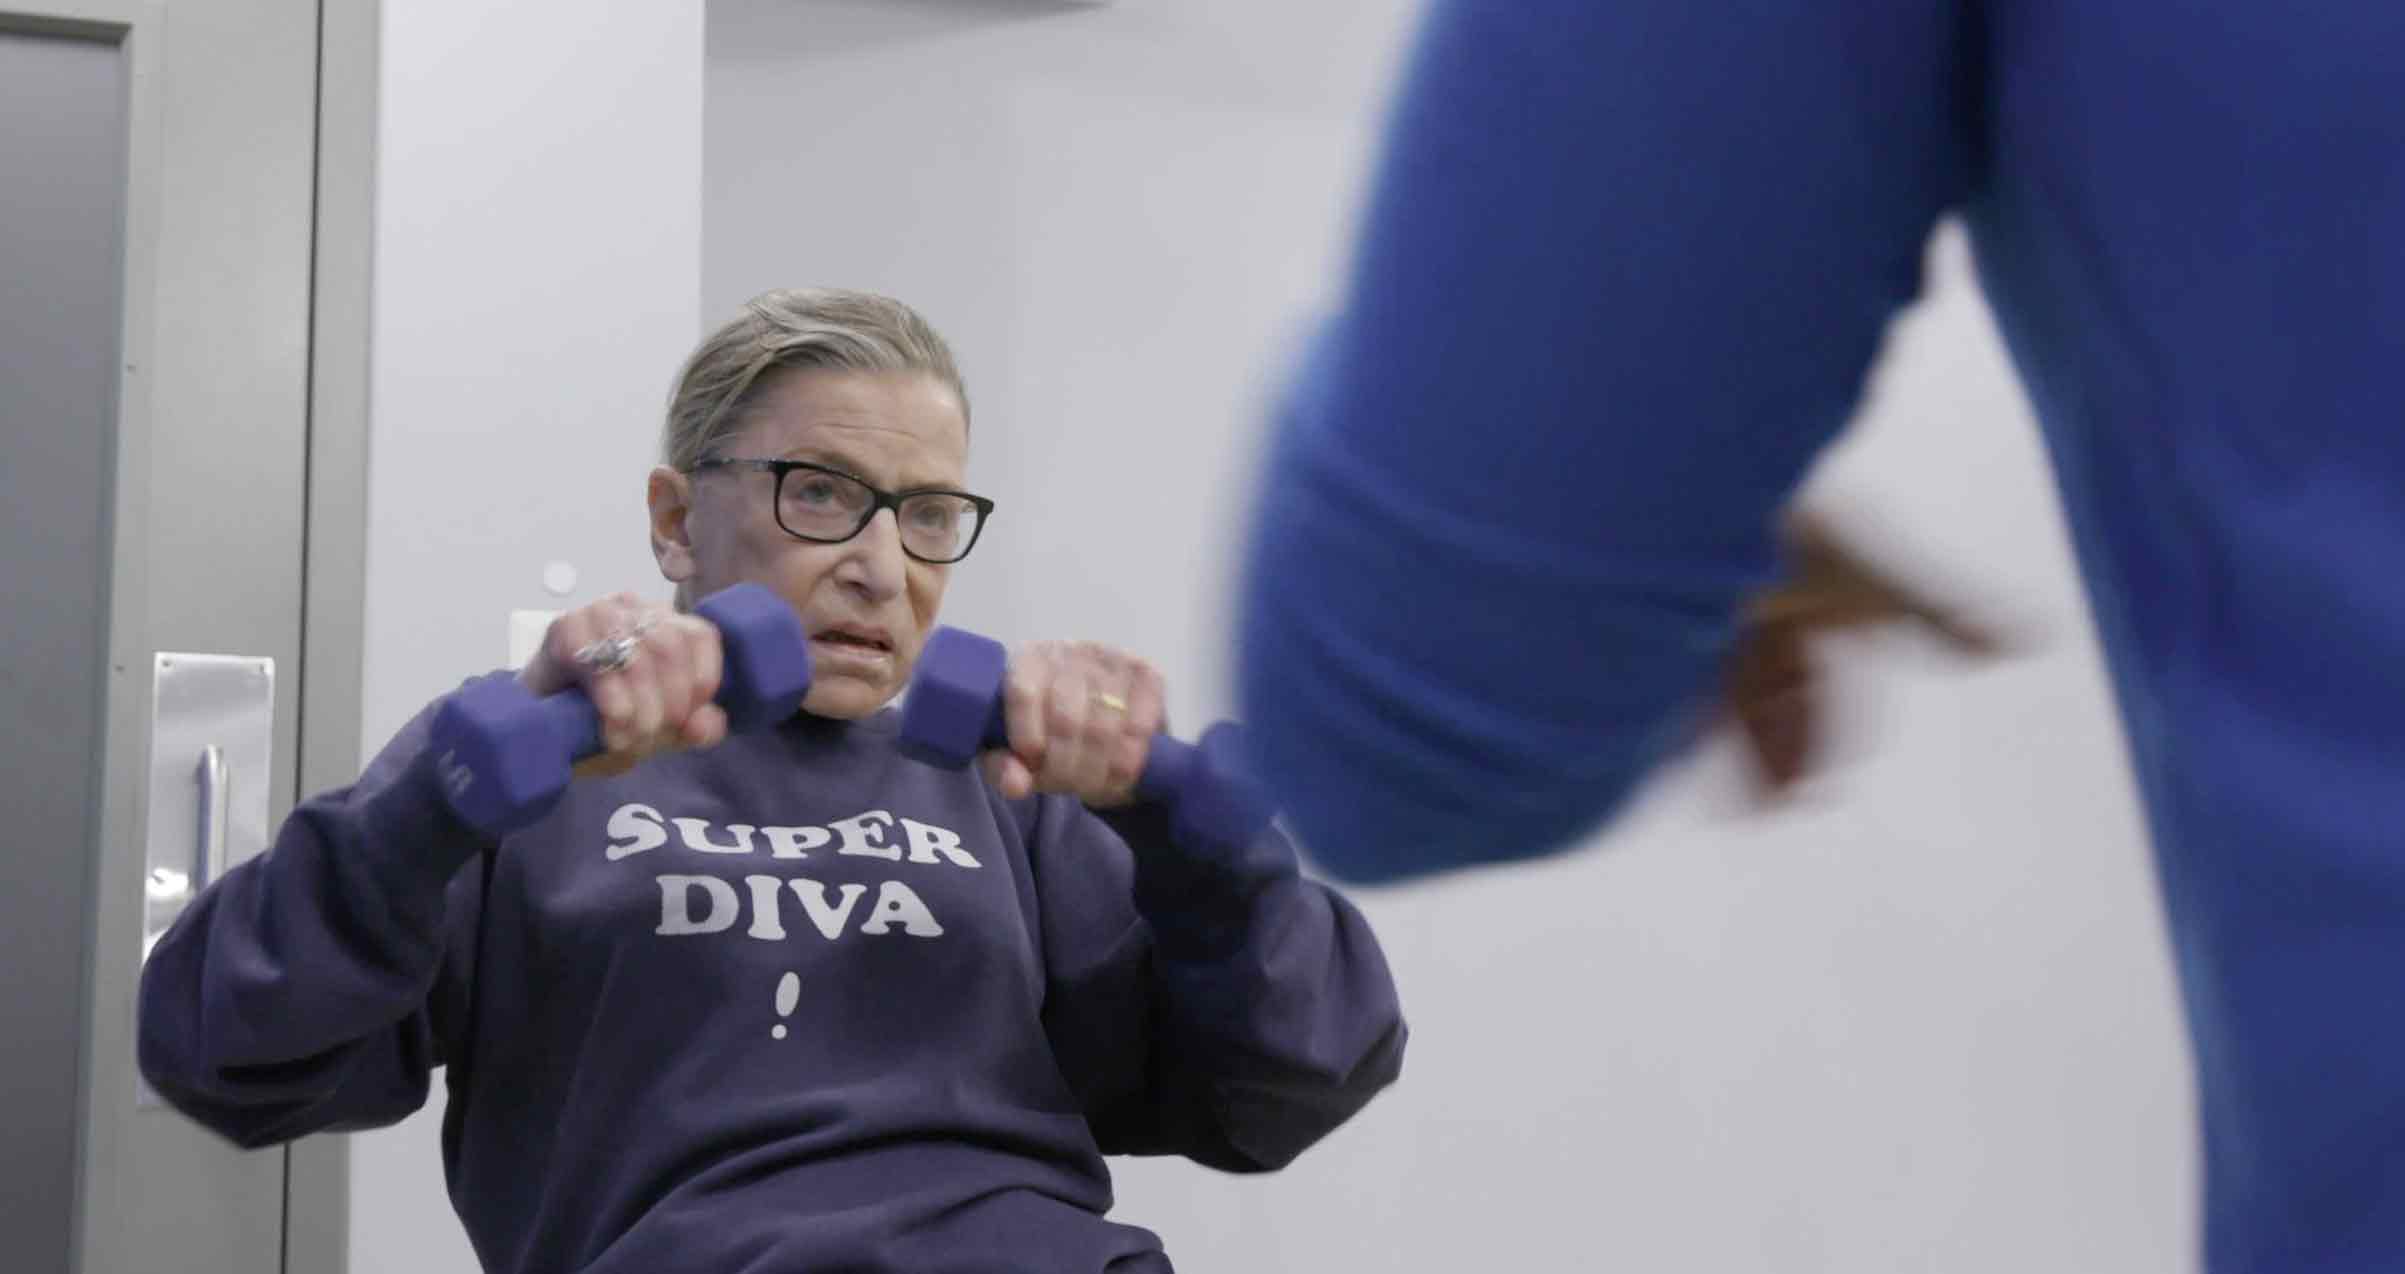 RBG, one of this summer’s knockout documentaries, chronicles the adventures of another kind of superhero: Justice Ruth Bader Ginsburg (Magnolia Pictures)